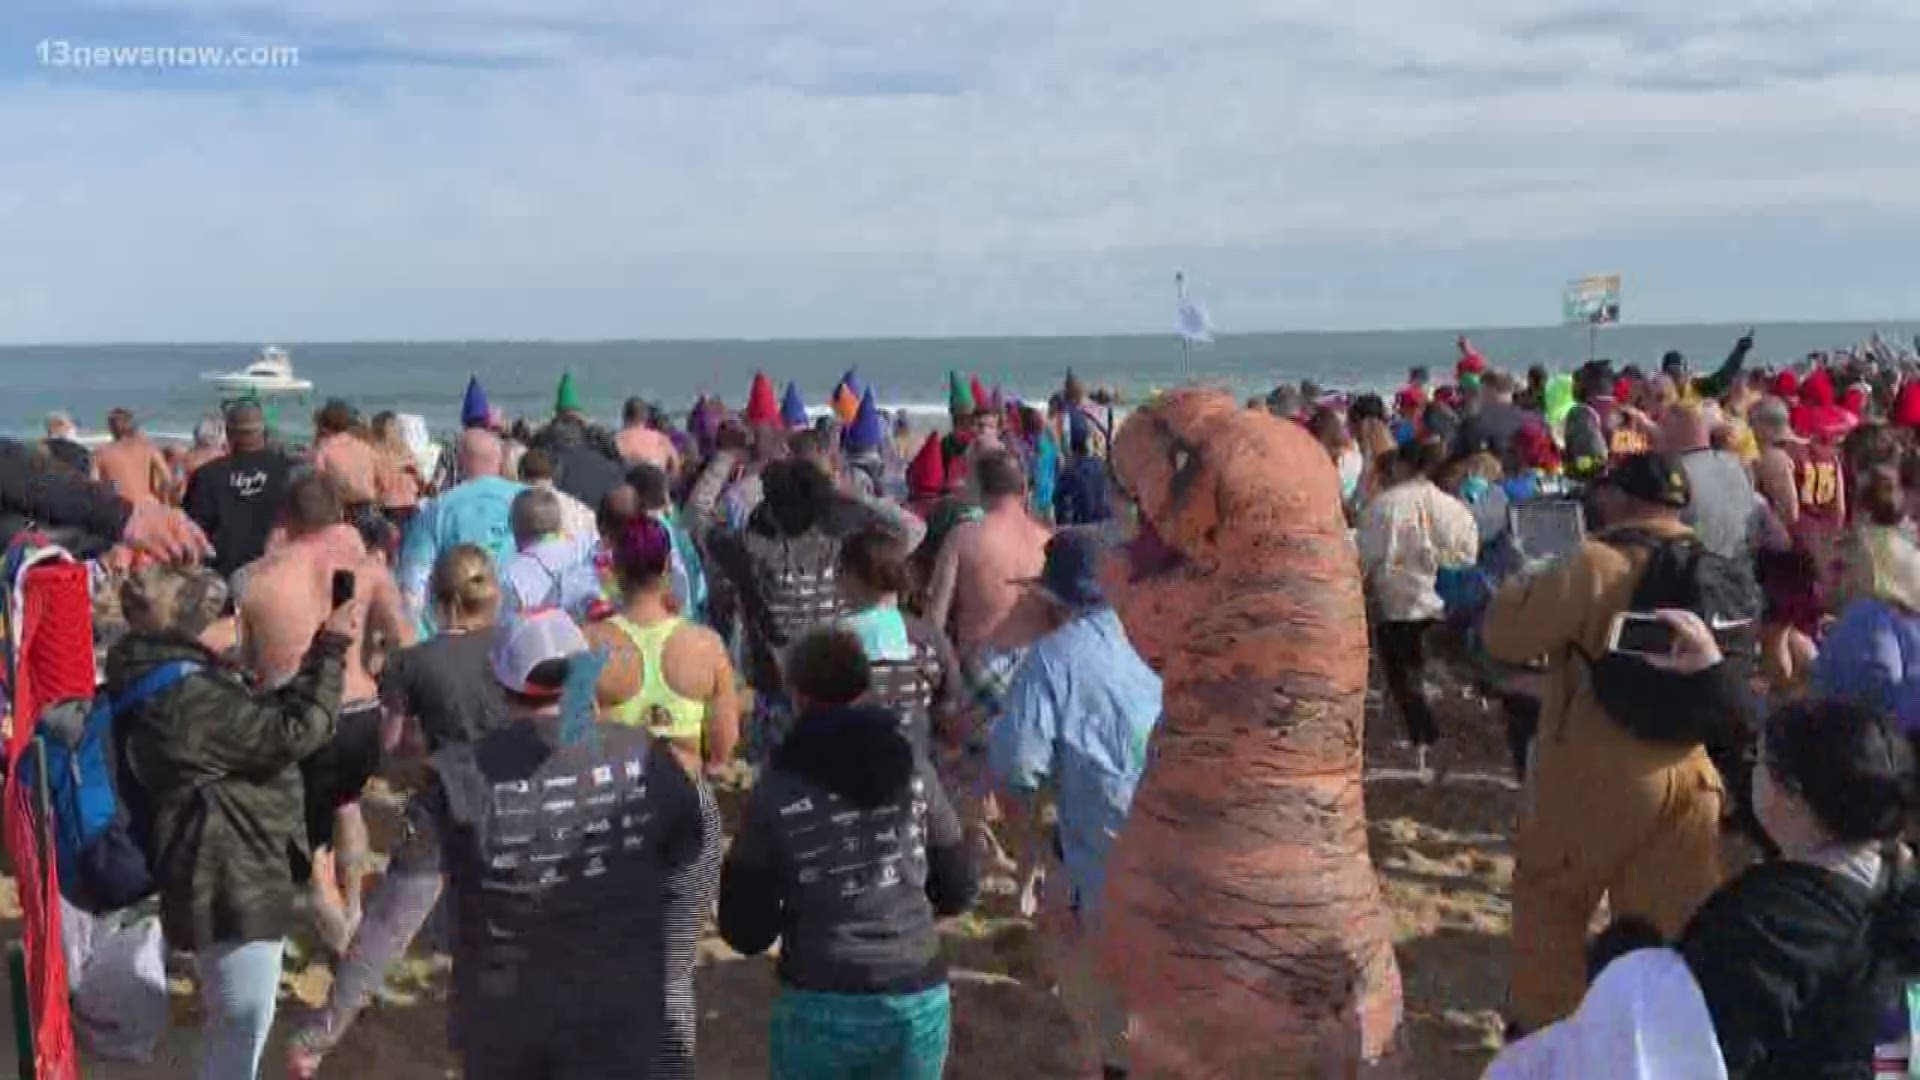 The Saturday event starts with a 4-mile run and ends with a chilly dip into waters at the Oceanfront.